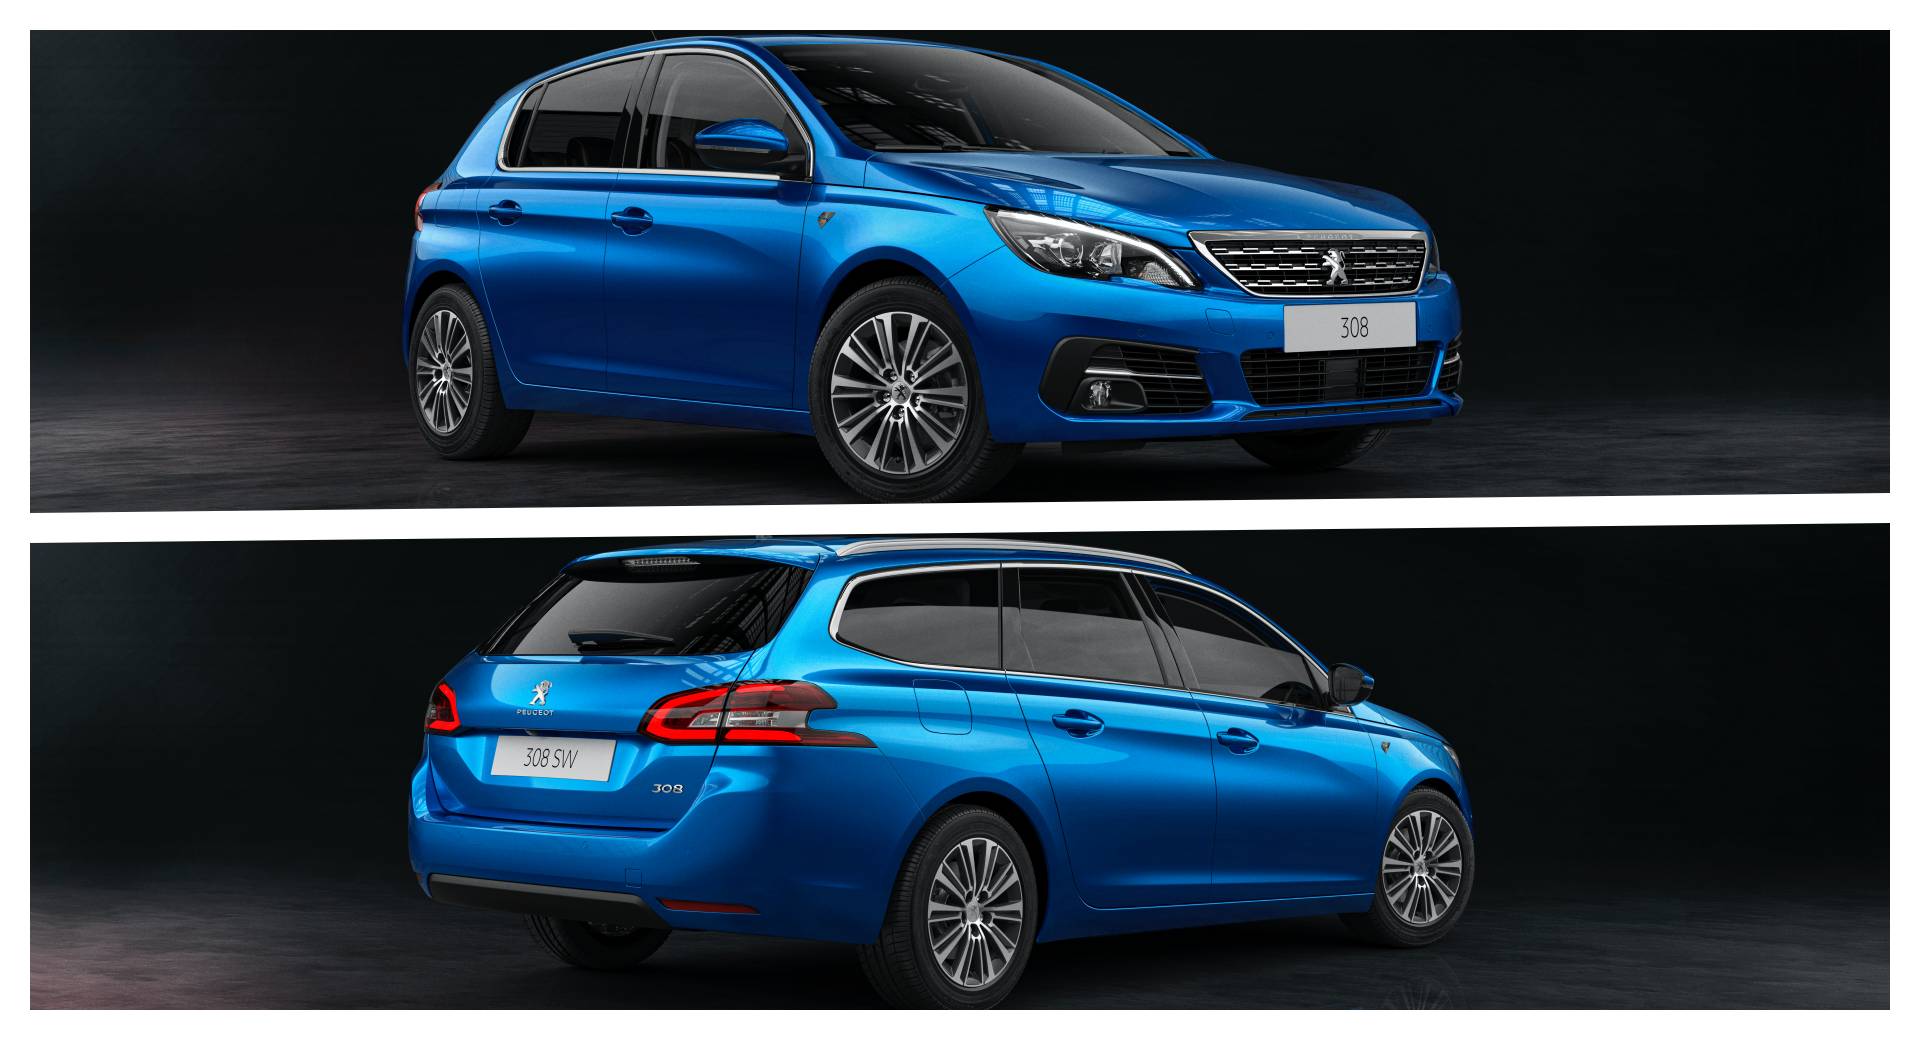 Loaded 2021 Peugeot 308 Roadtrip Edition Debuts As “A Clear